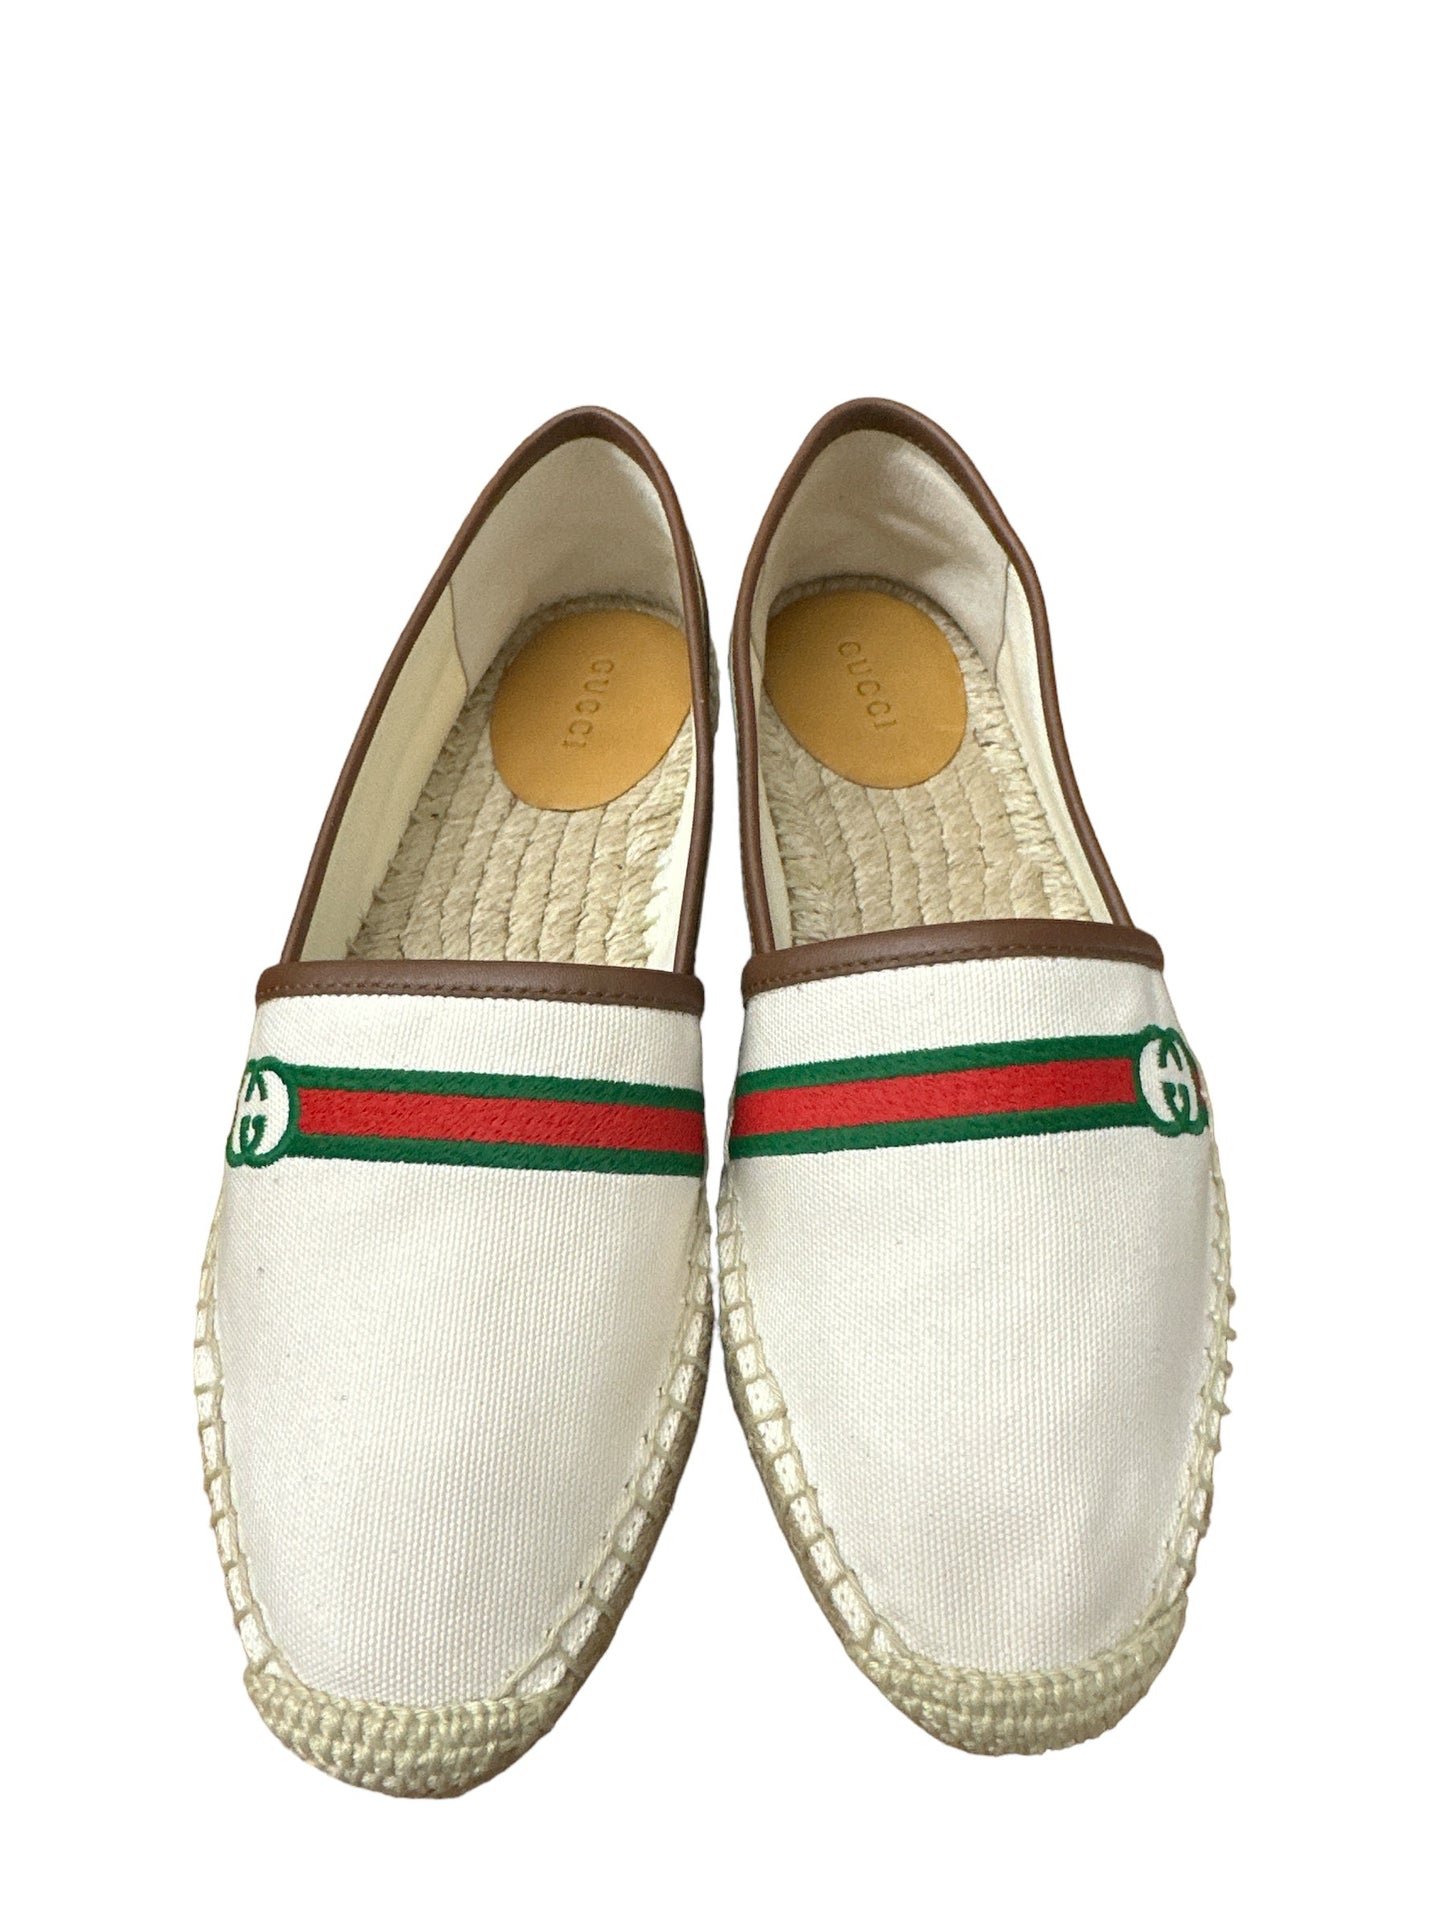 Shoes Luxury Designer By Gucci